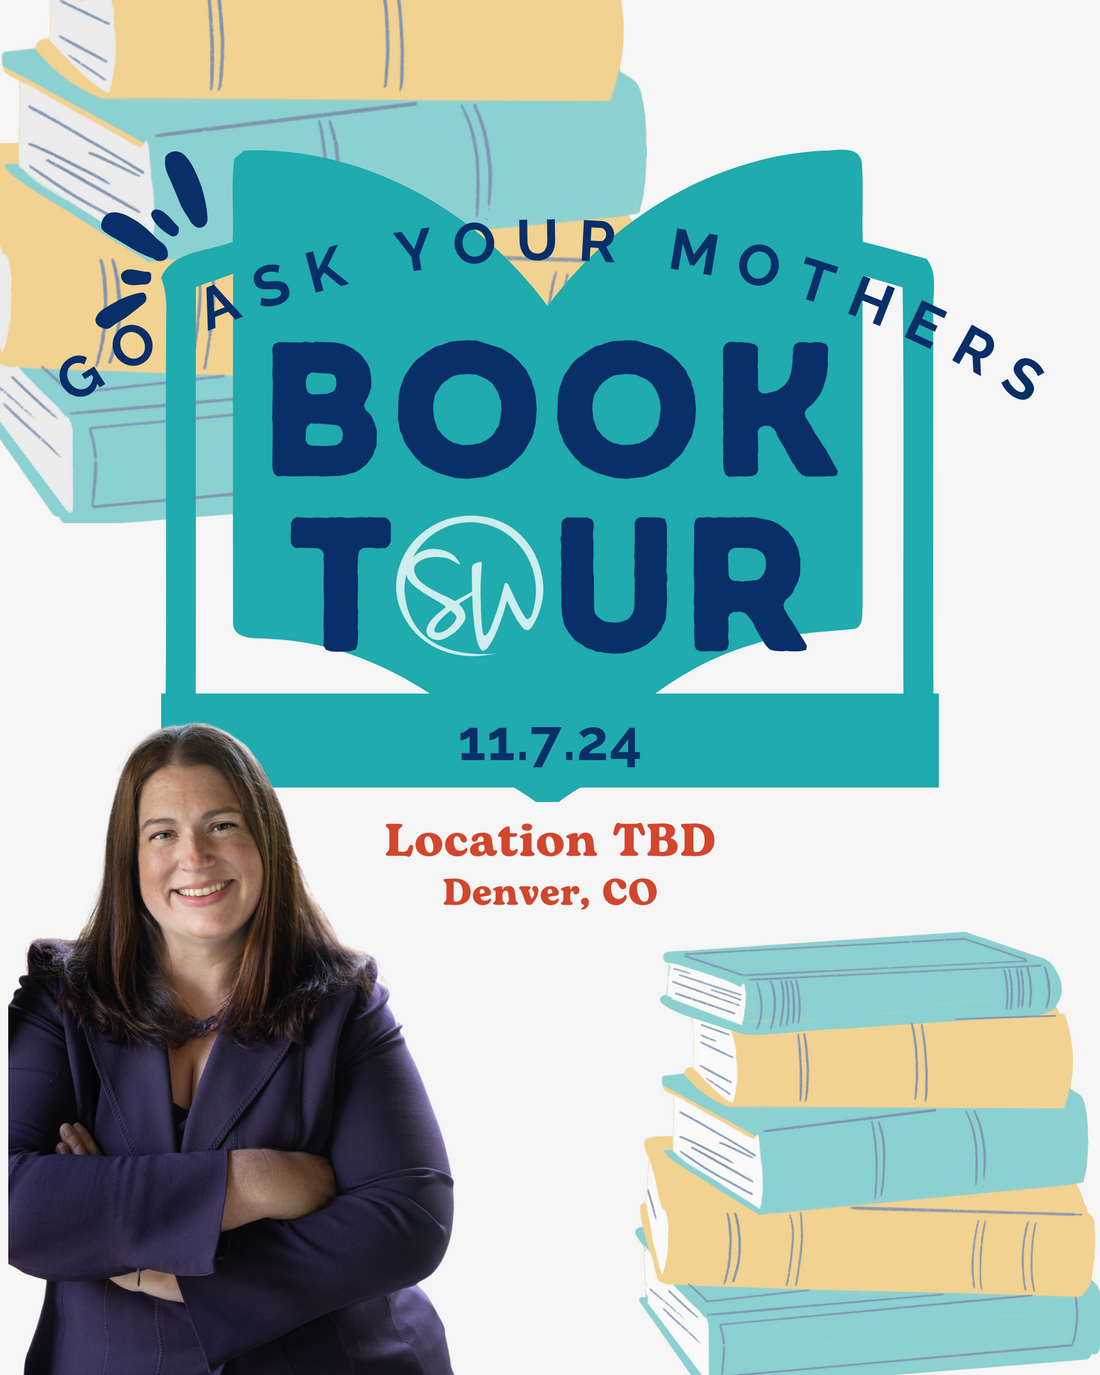 Go Ask Your Mothers w/Sarah Wells - Book Tour 2024 - Denver, CO - FREE Ticket